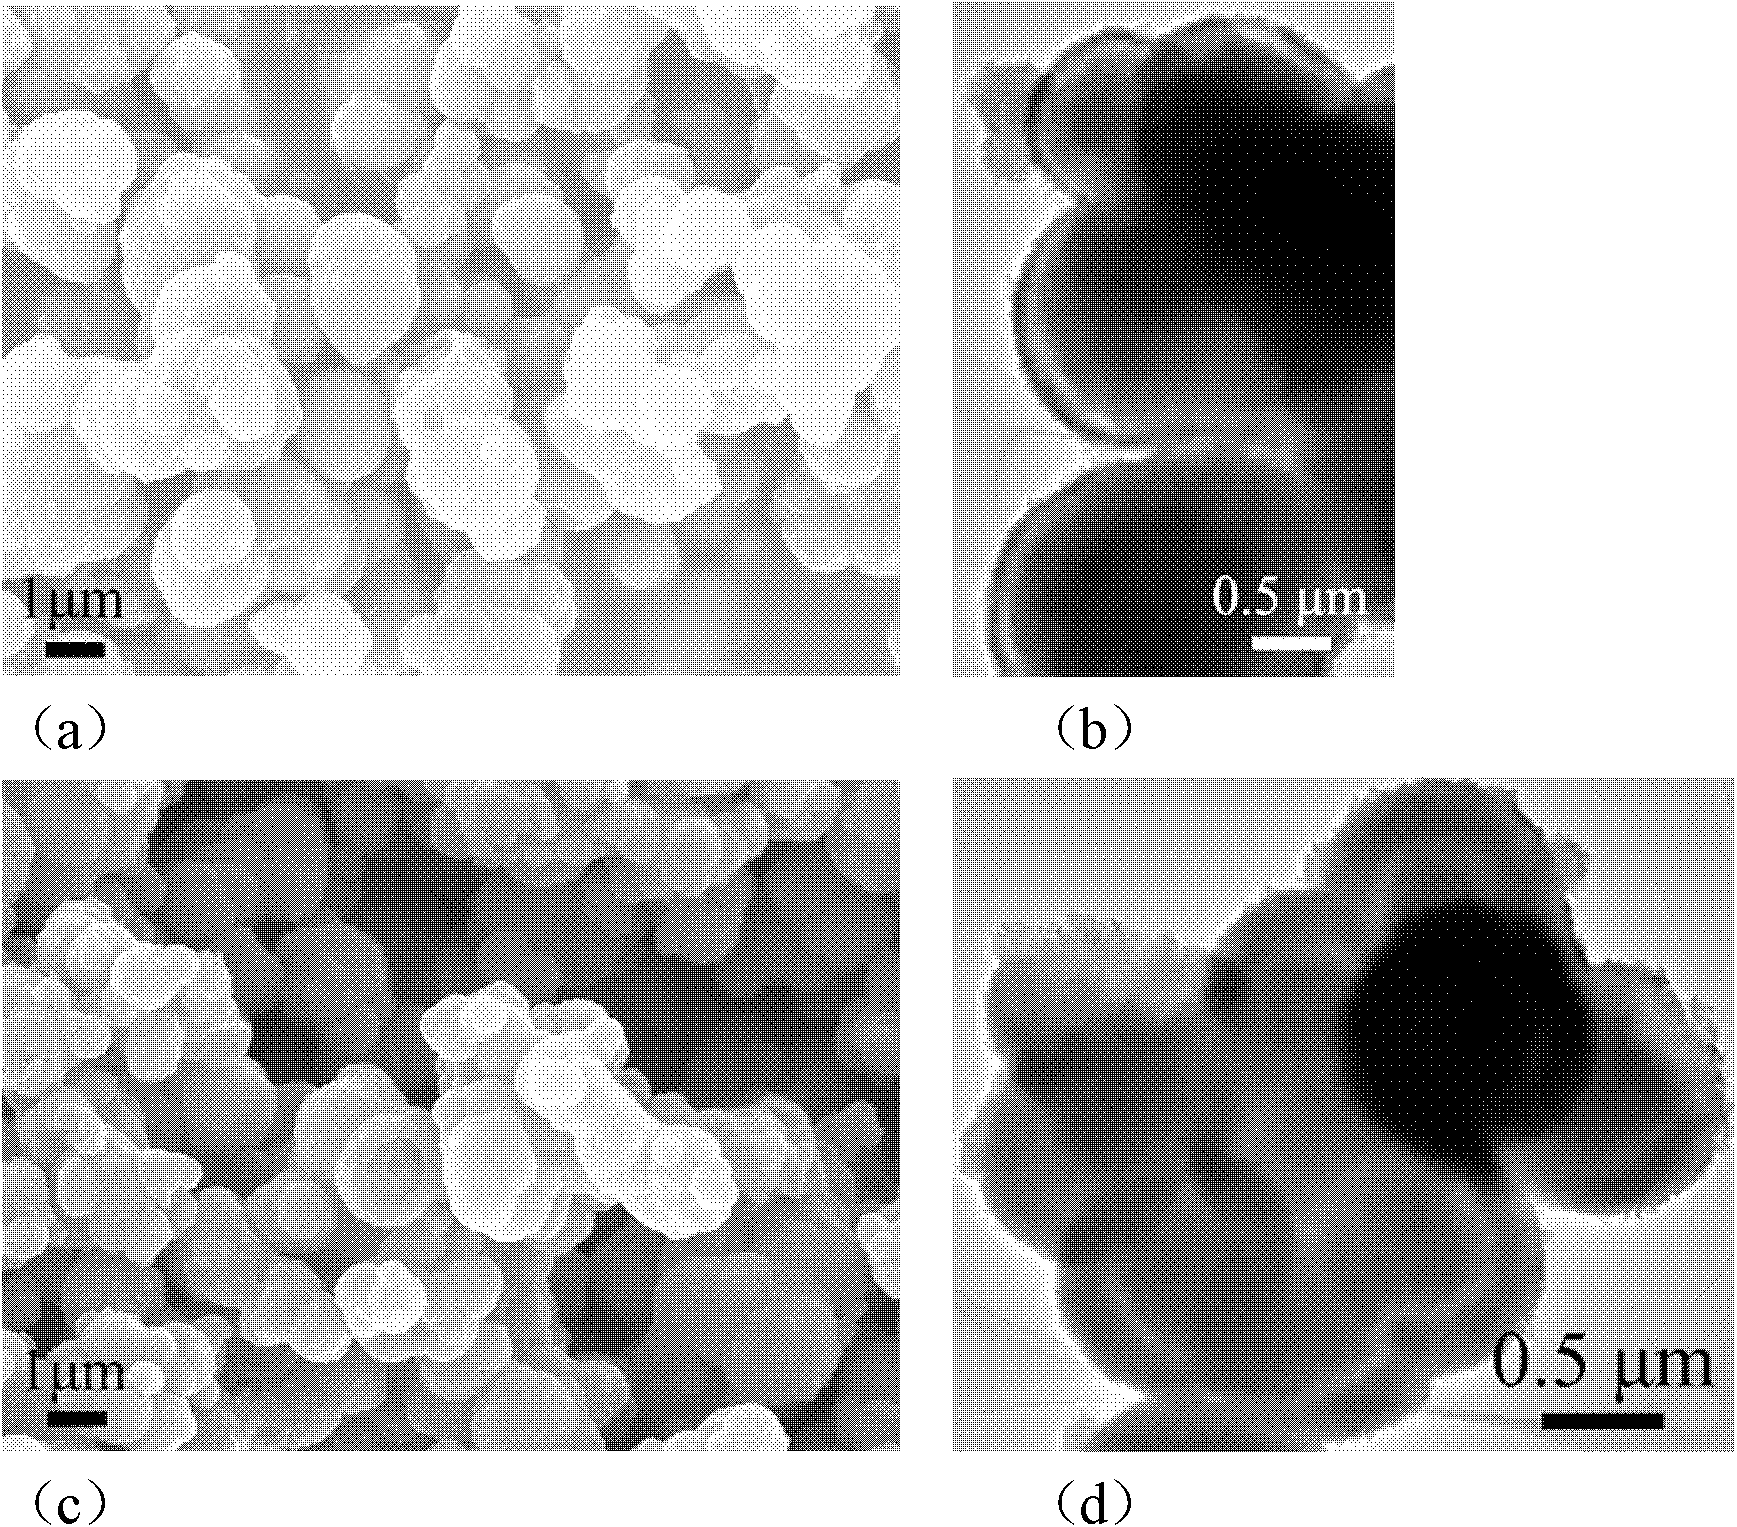 Method for preparing anatase porous TiO2 spheres, core-shell structure and hollow spheres